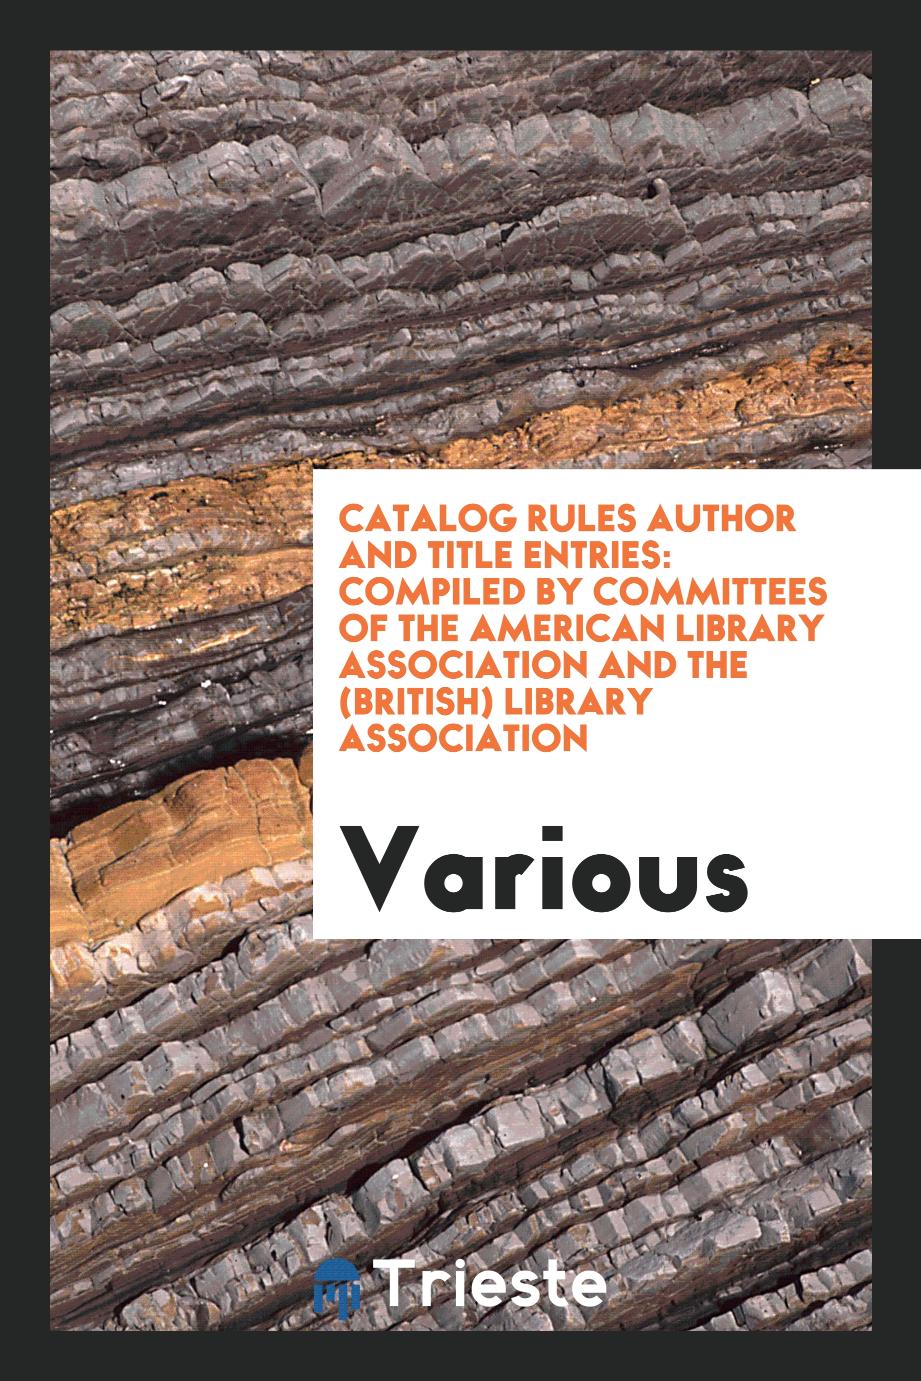 Catalog Rules Author and Title Entries: Compiled by Committees of the American Library Association and the (British) Library Association